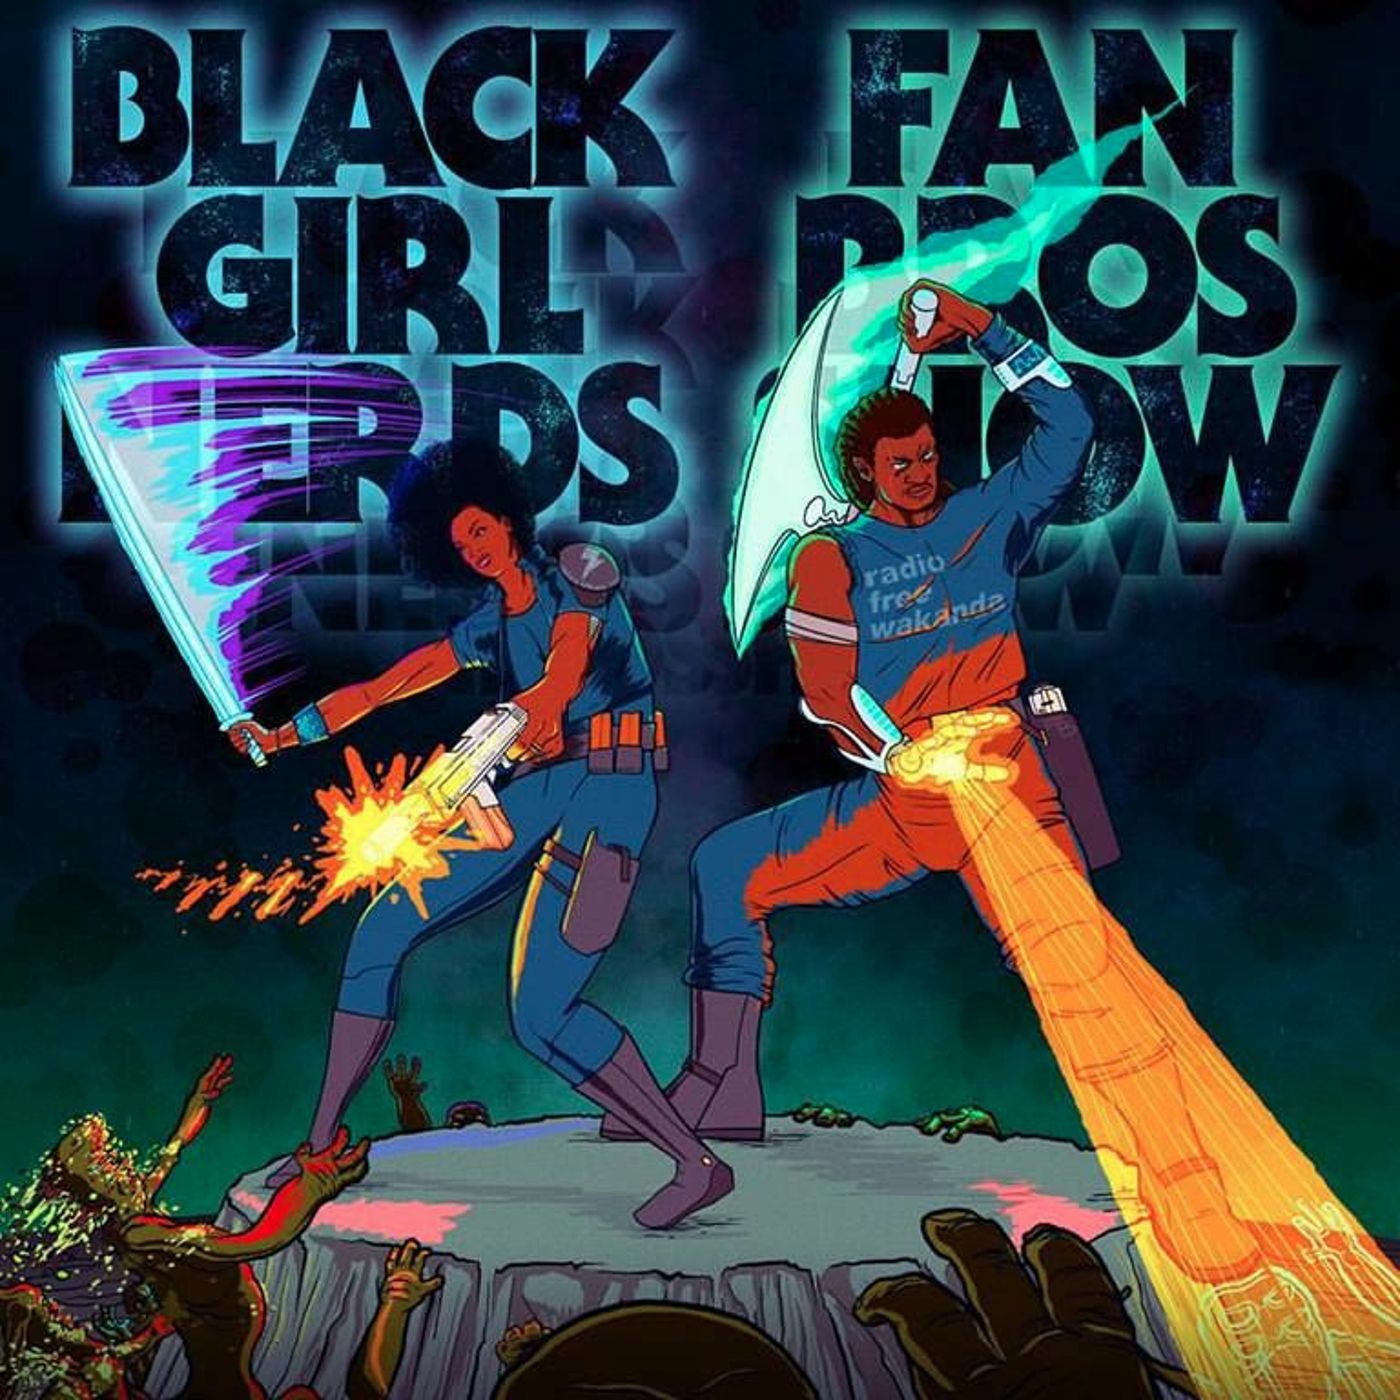 Black Girl Nerds Vs FanBros Live From NYSW